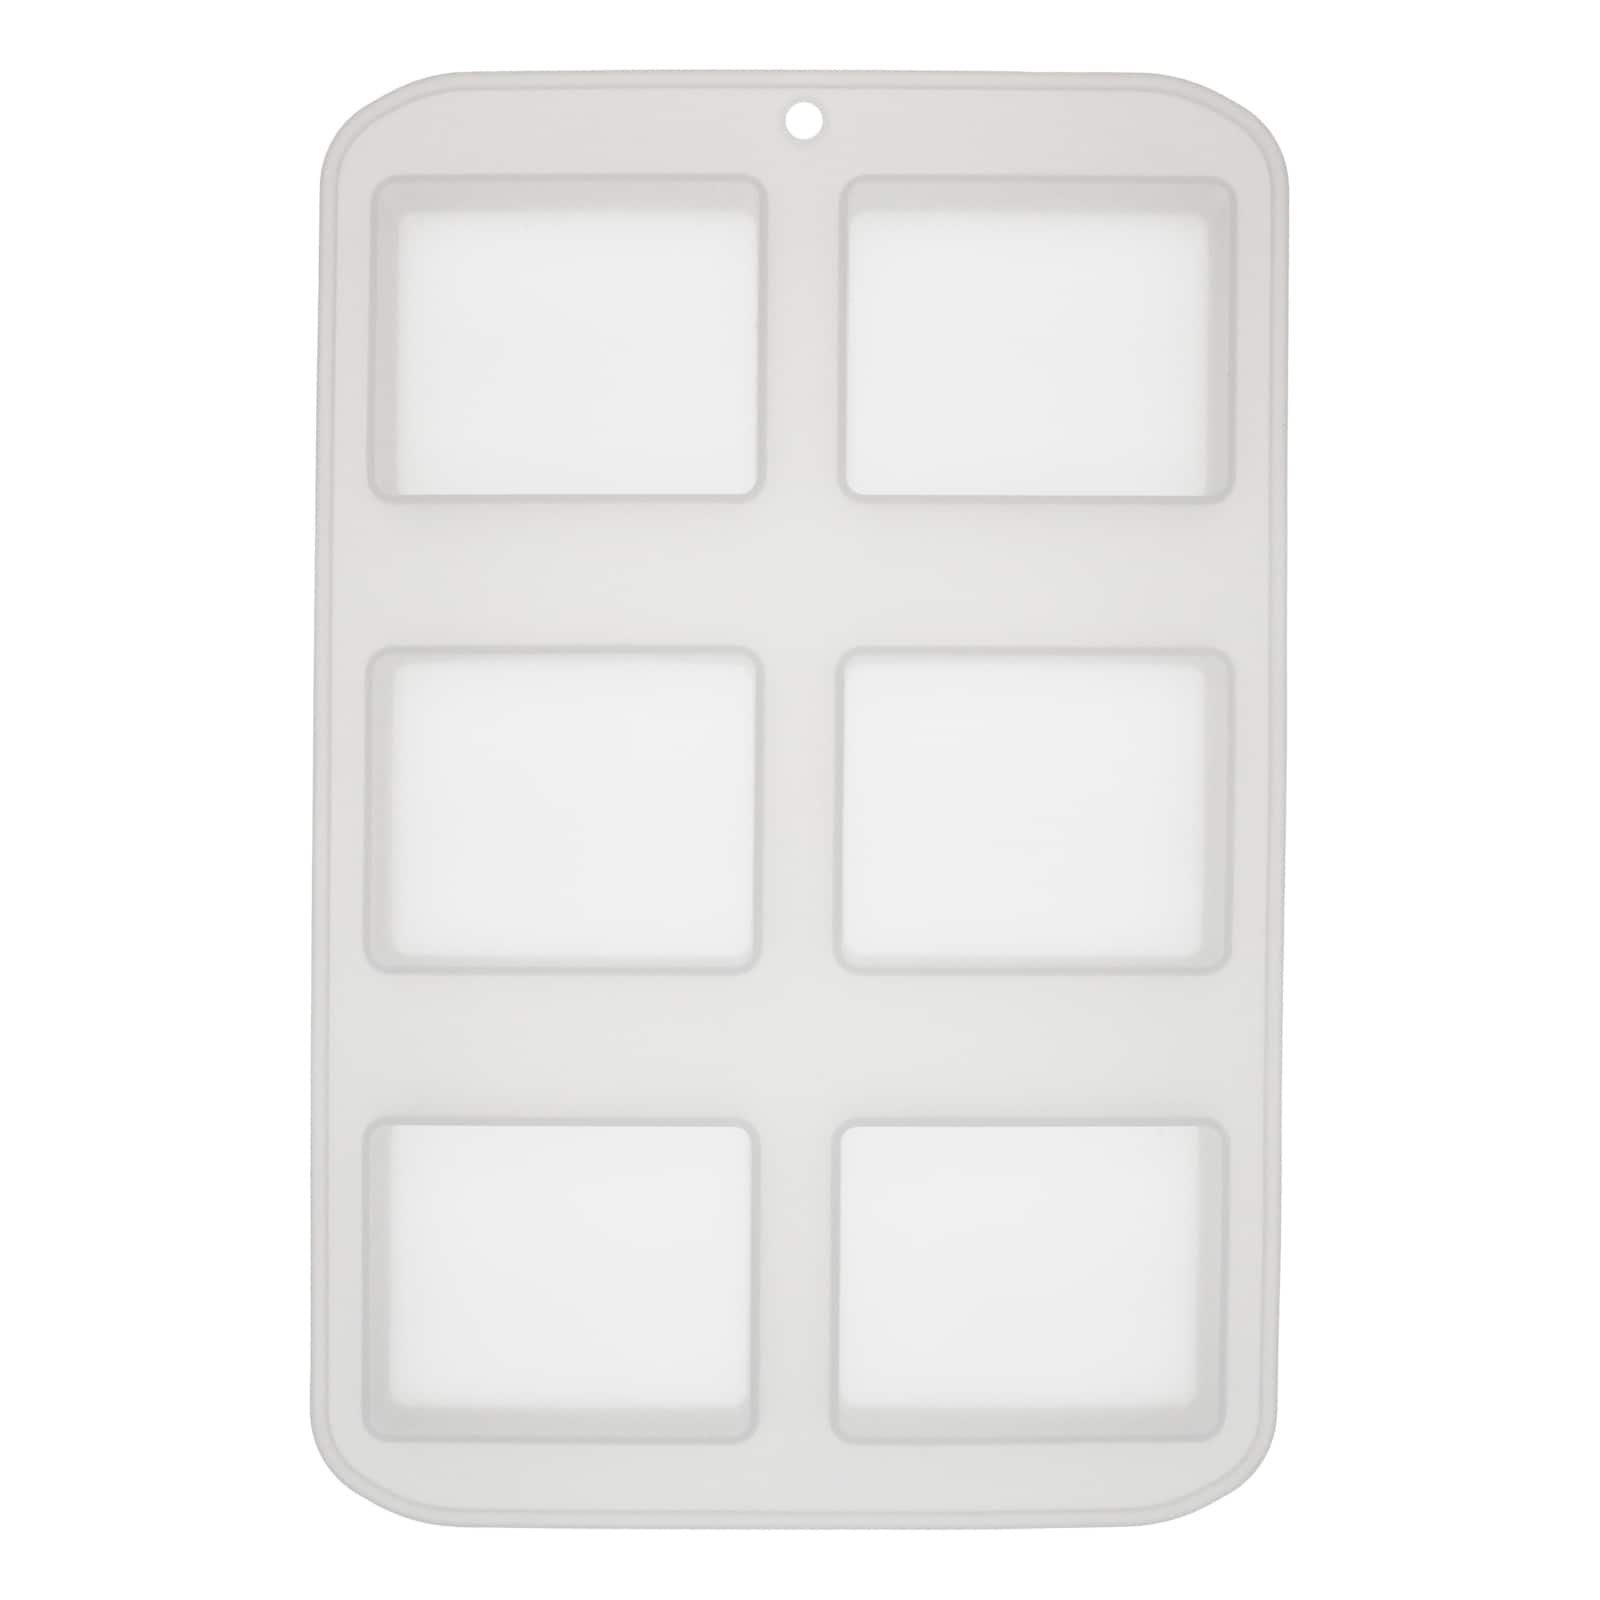 Incraftables Silicone Soap Molds for Soap Making, DIY Bars, Bath Bombs,  Cake & Candles (3 Set) 